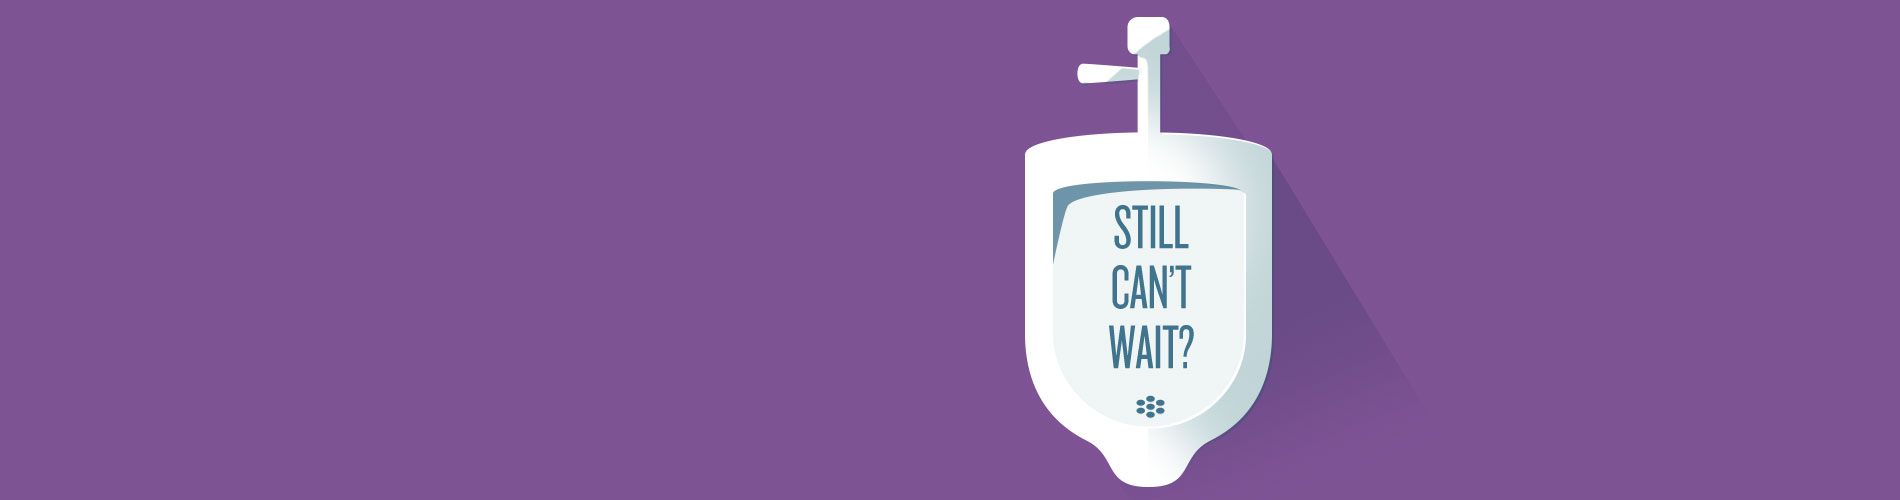 Illustration of urinals with "Still Can't Wait" text.